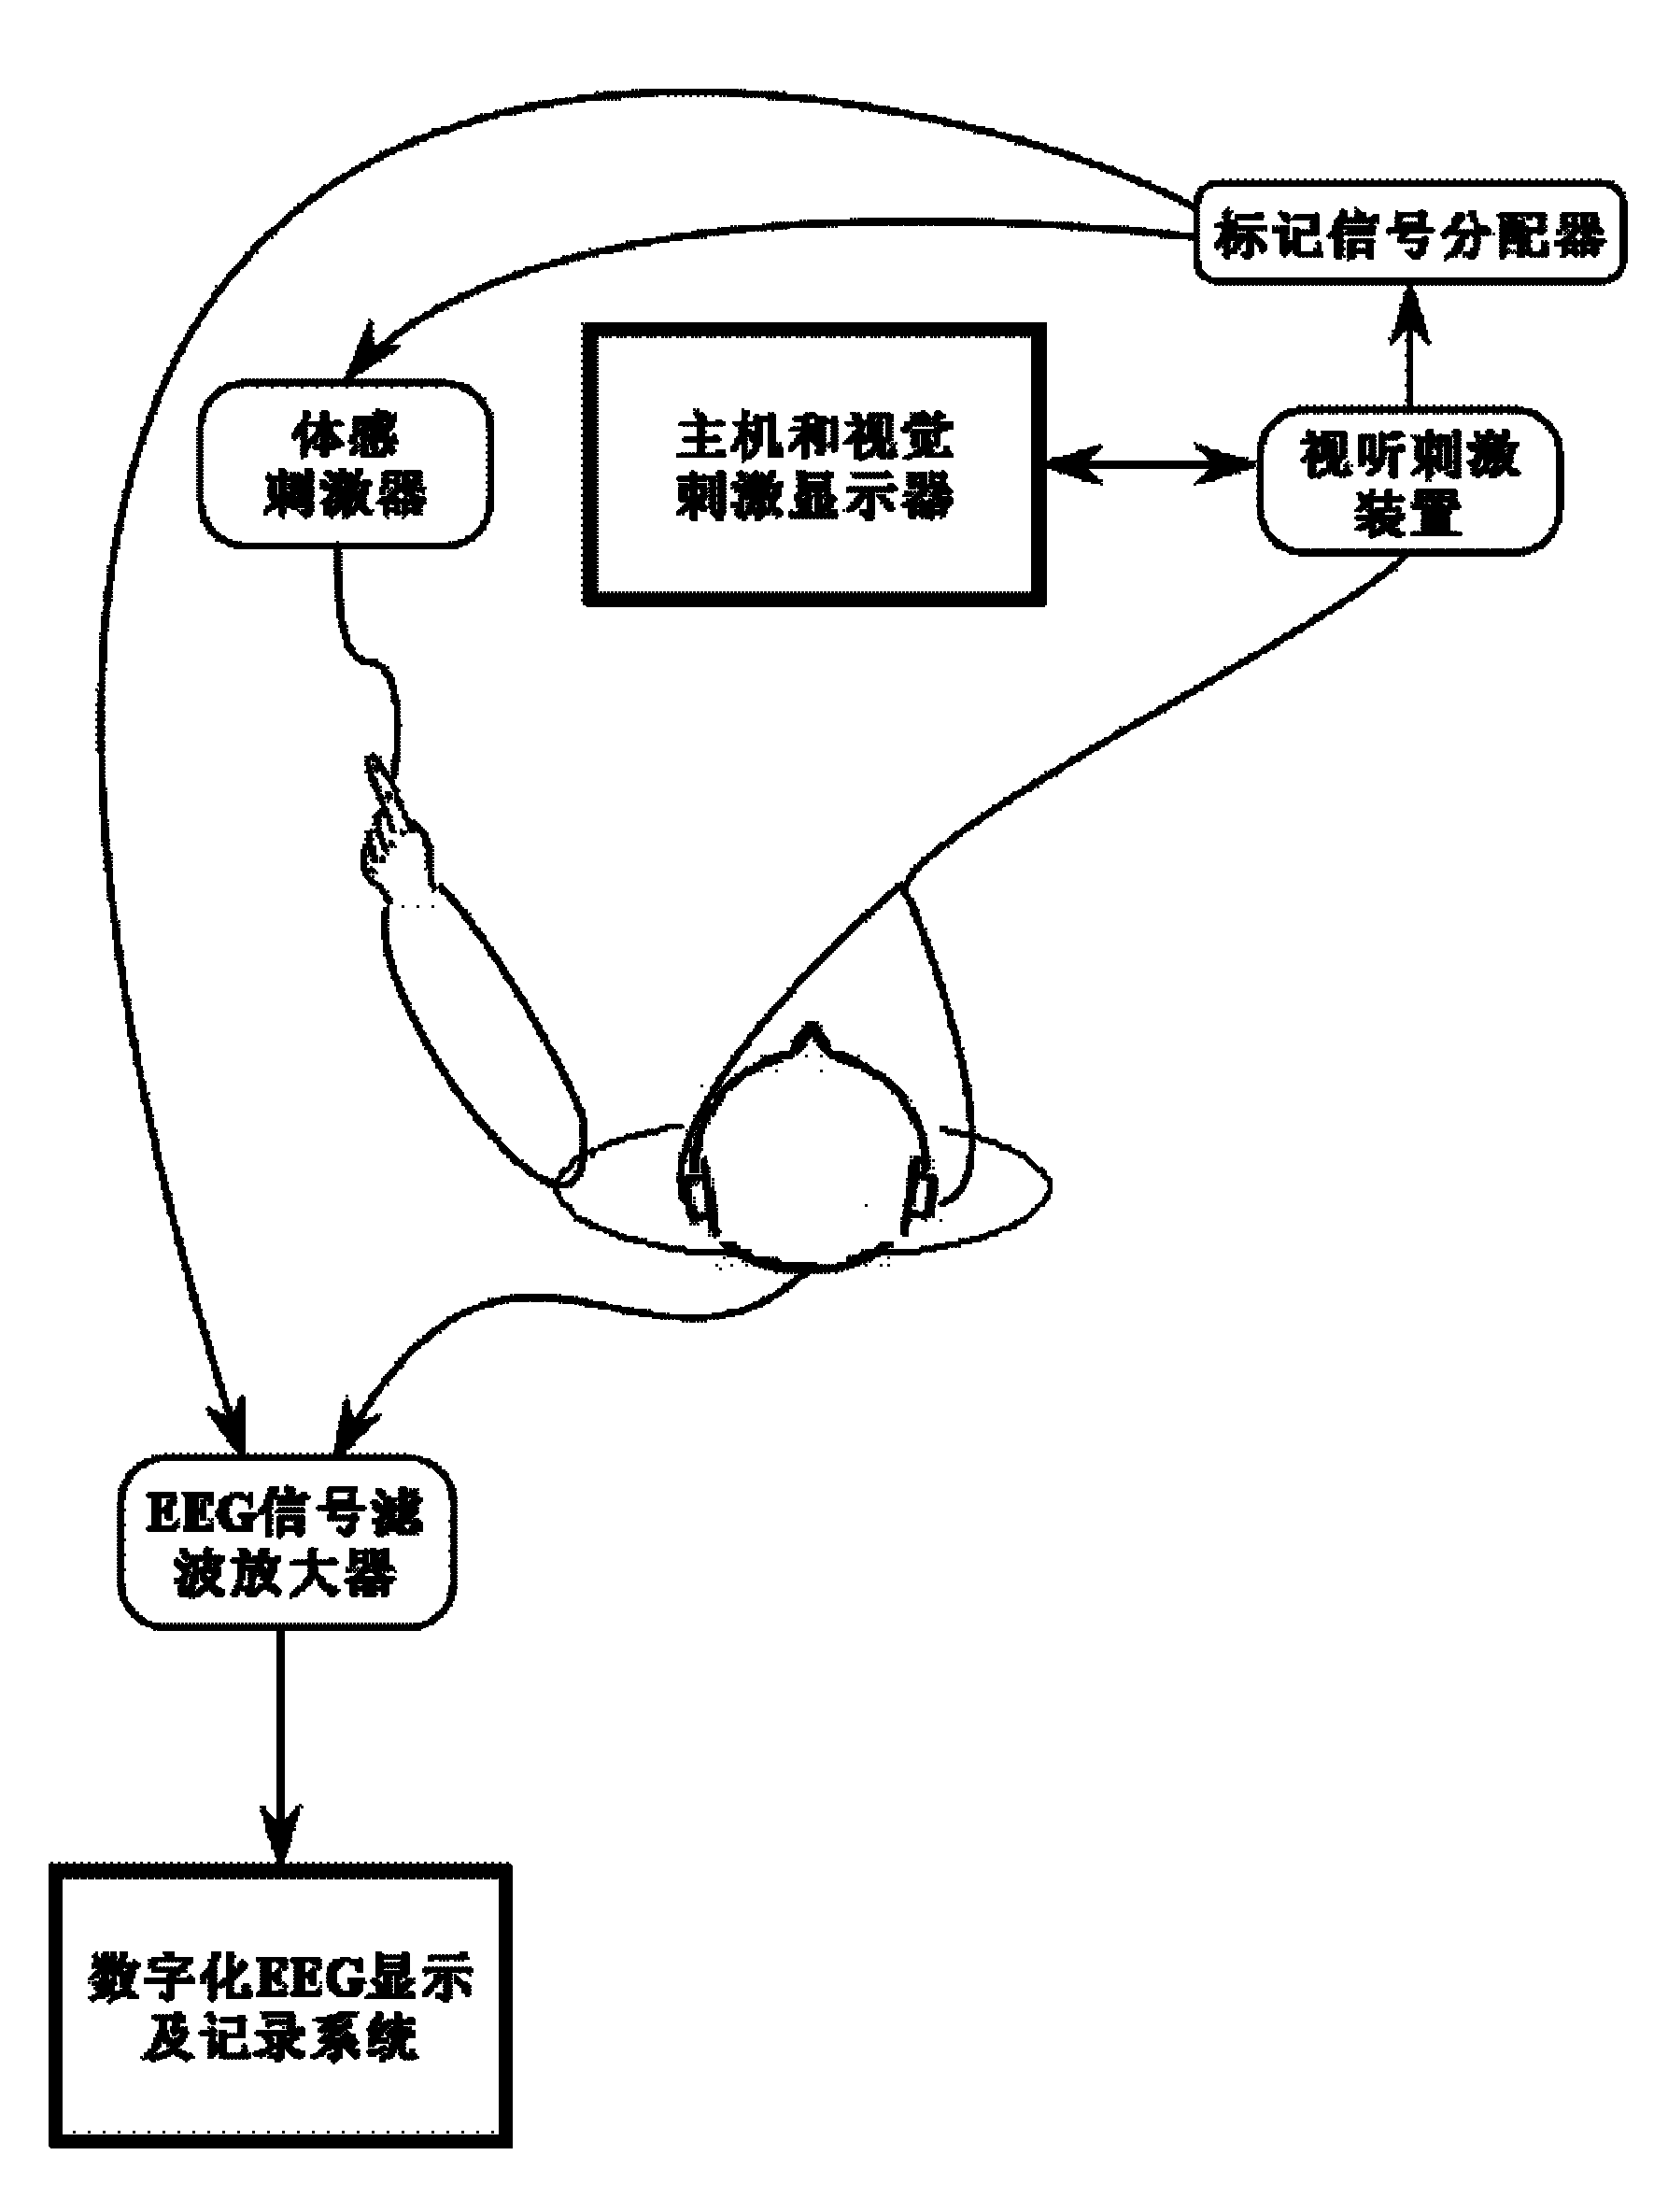 Simultaneous stimulating and recording system of cross sensory channels of sight, sound and body sense